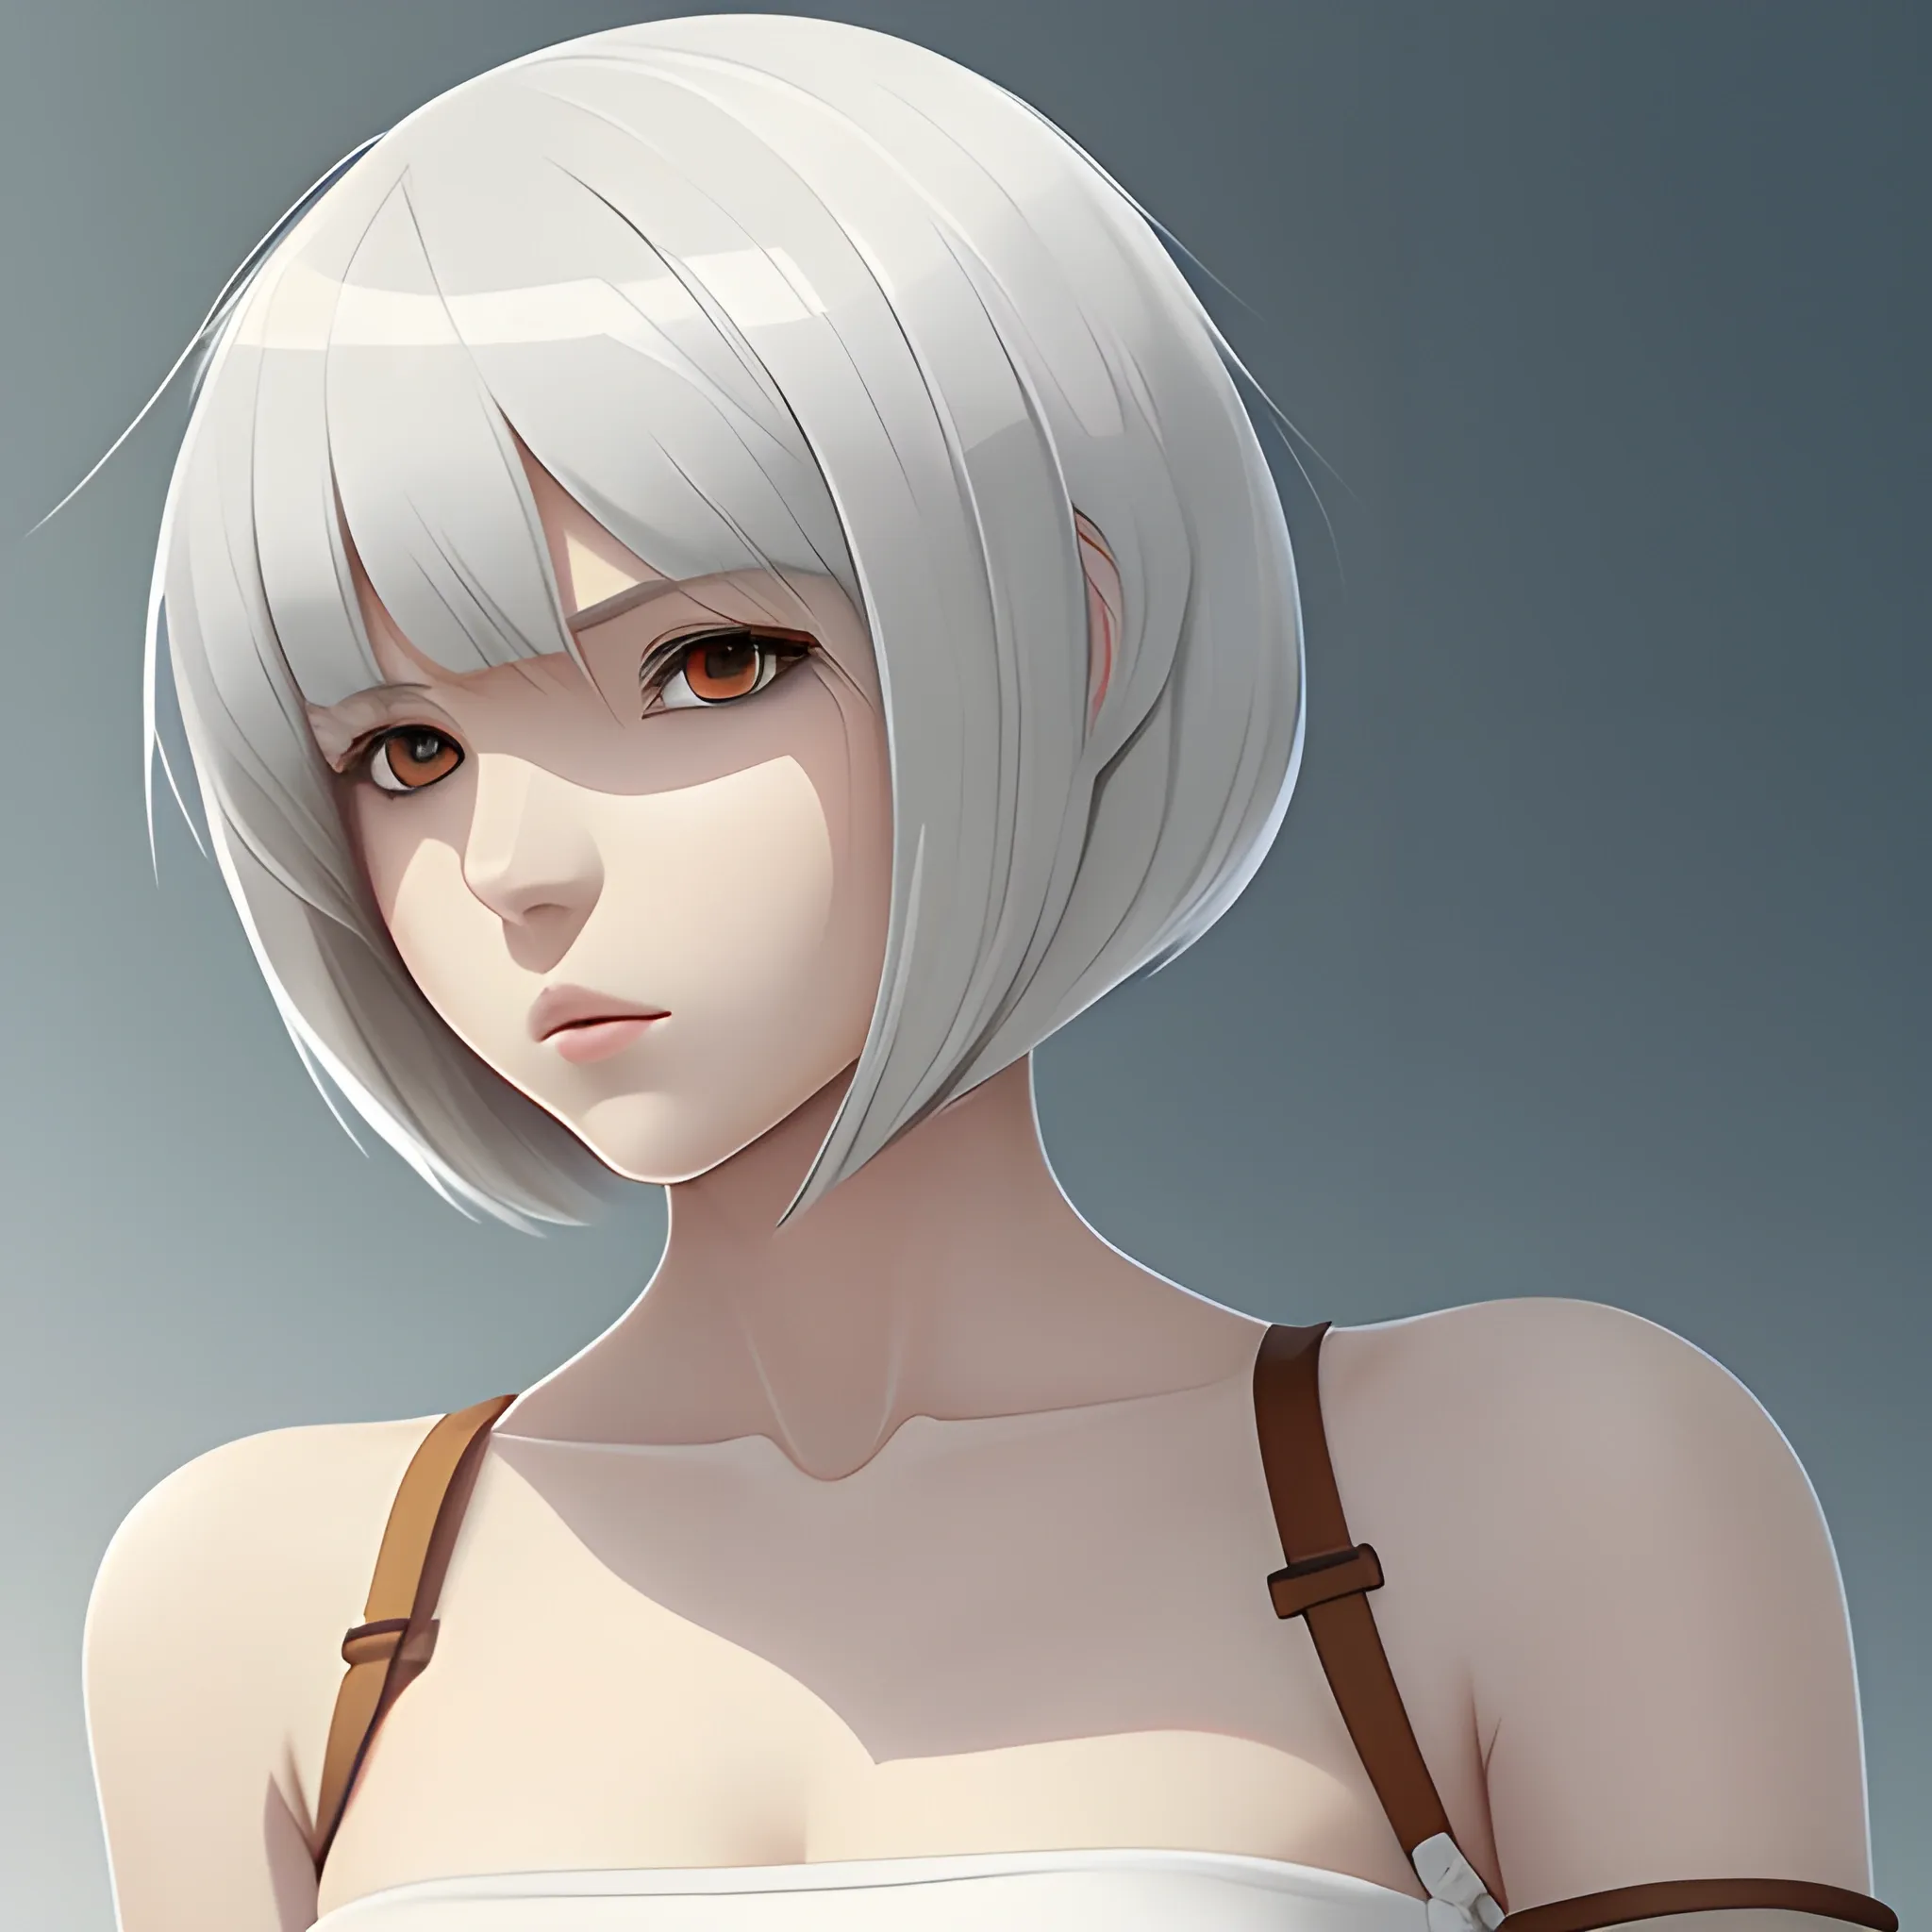 Woman, white clothes with brown borders, warrior, anime, detail, bob cut hair, half body, anime style